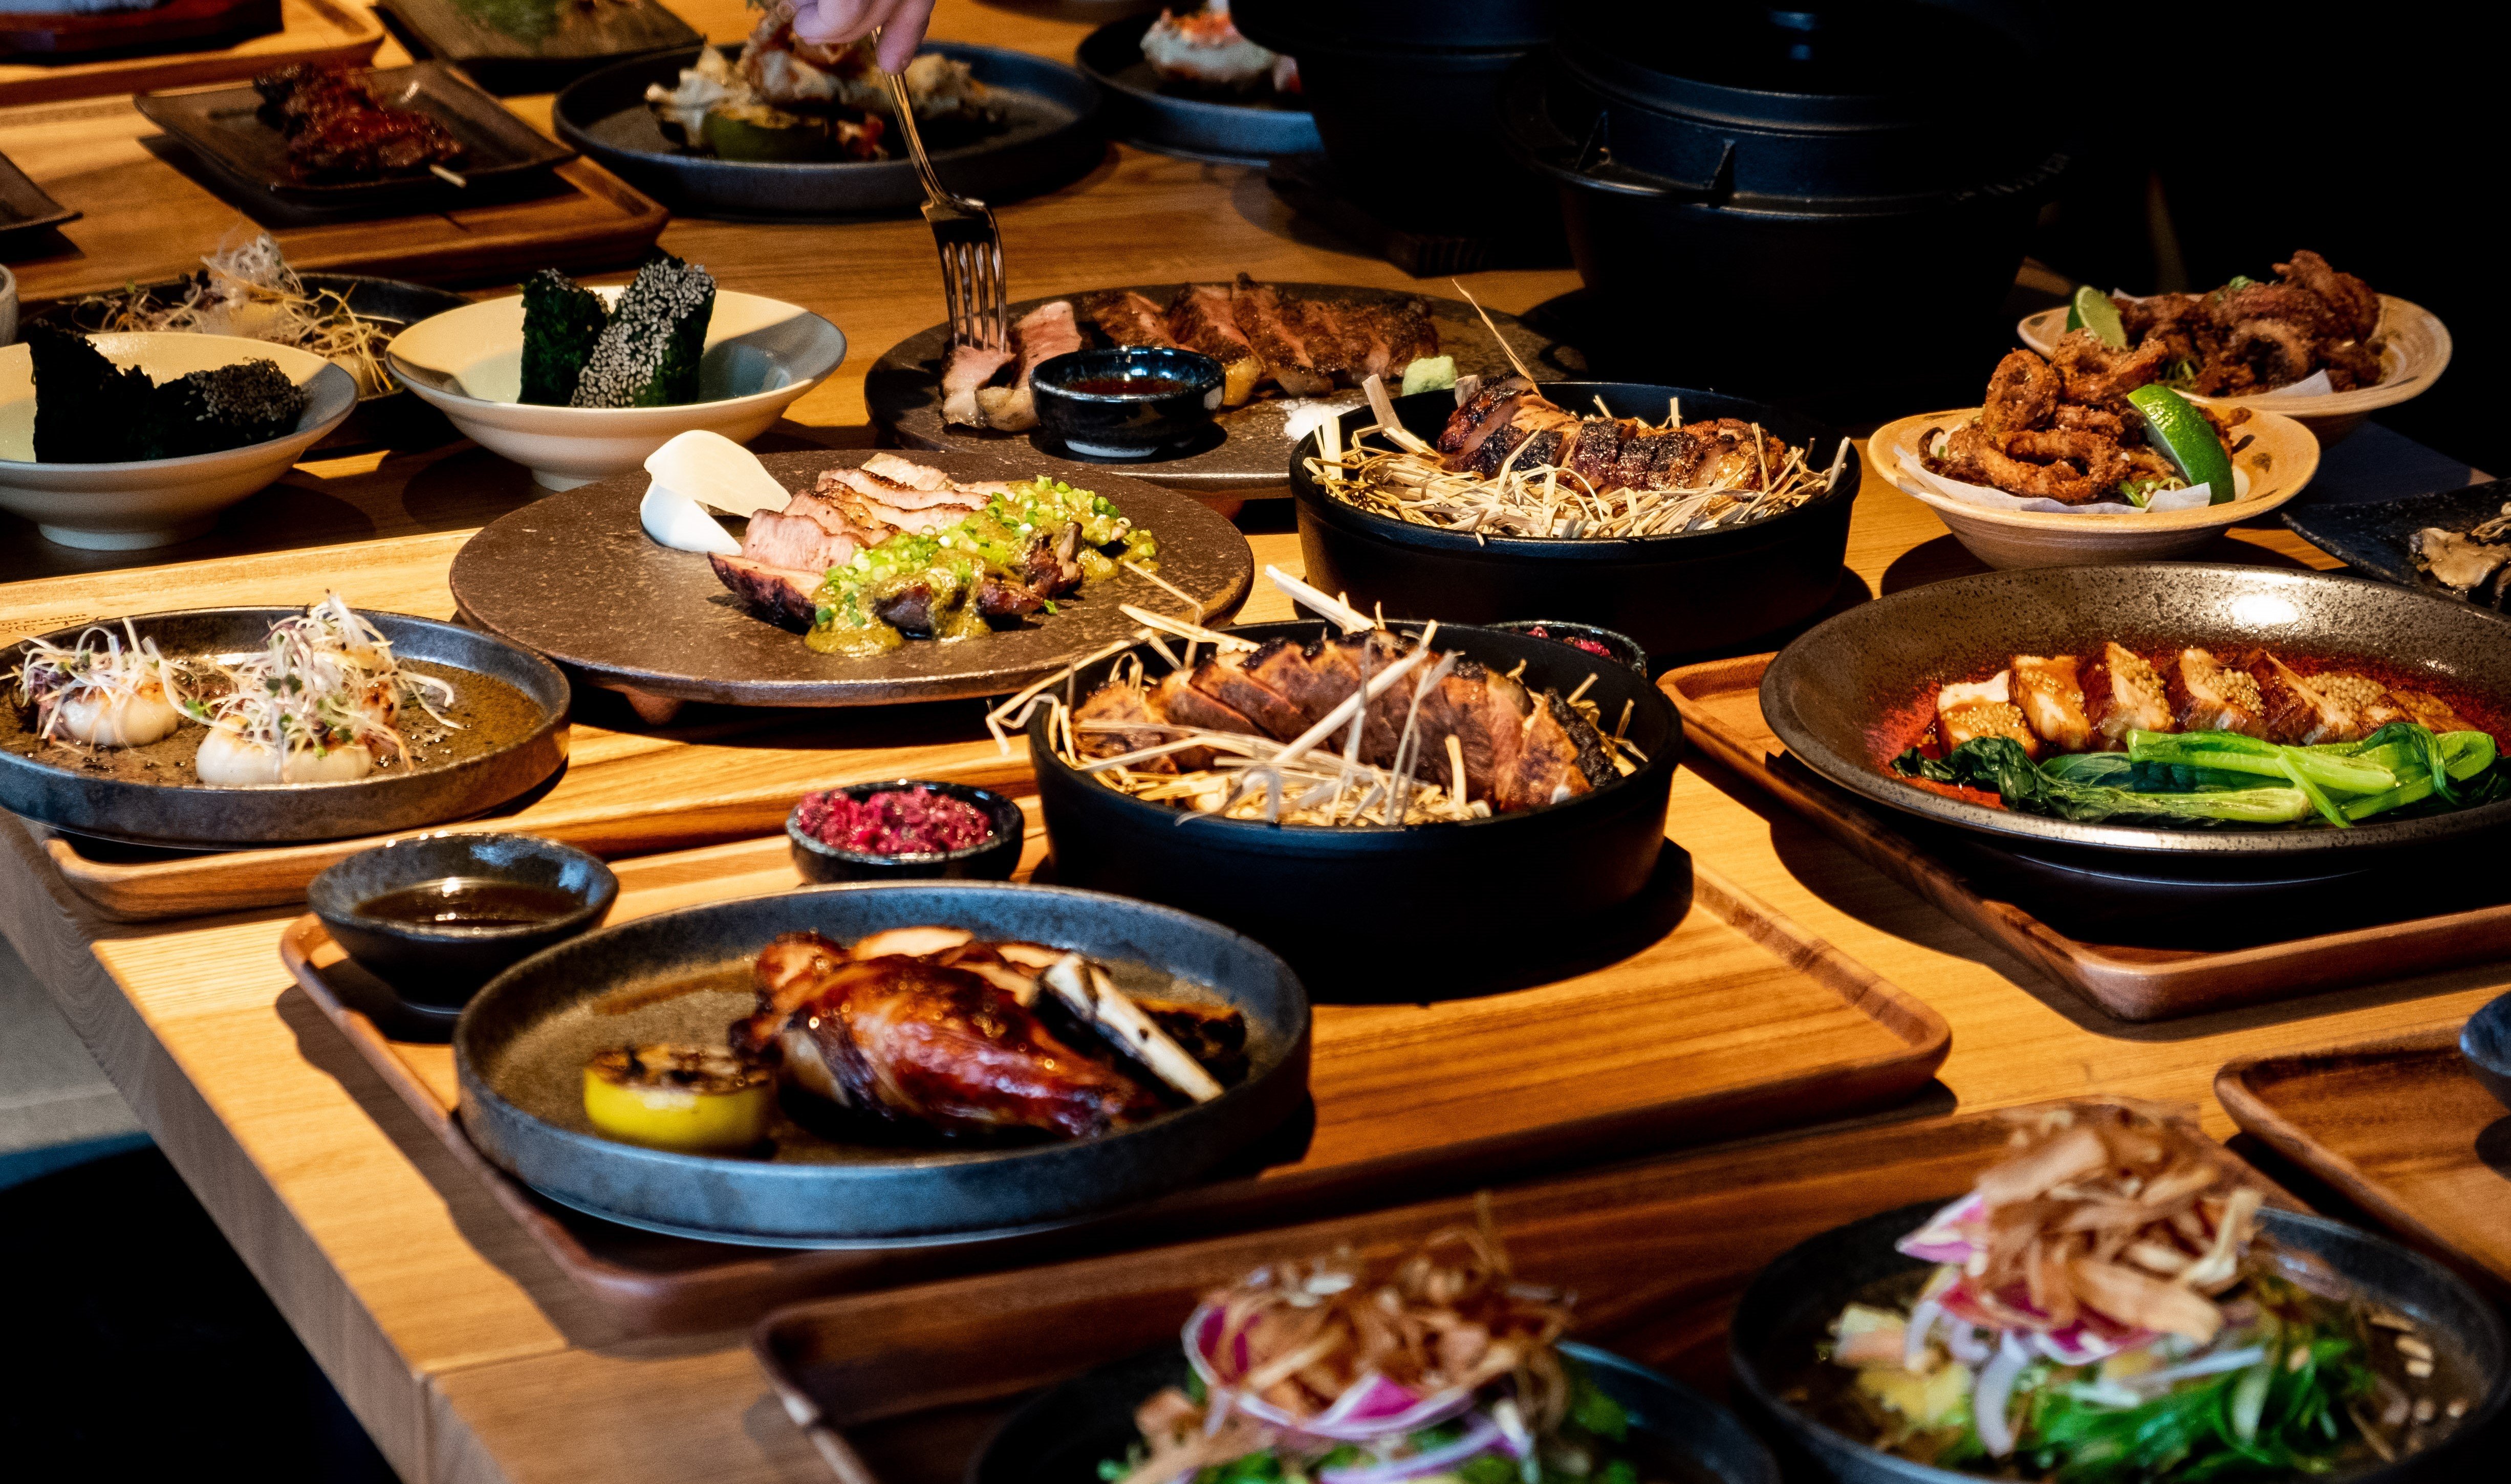 Kumo serves up ‘farm to flame’ meals as well as mesmerising views of the Hirafu slopes.